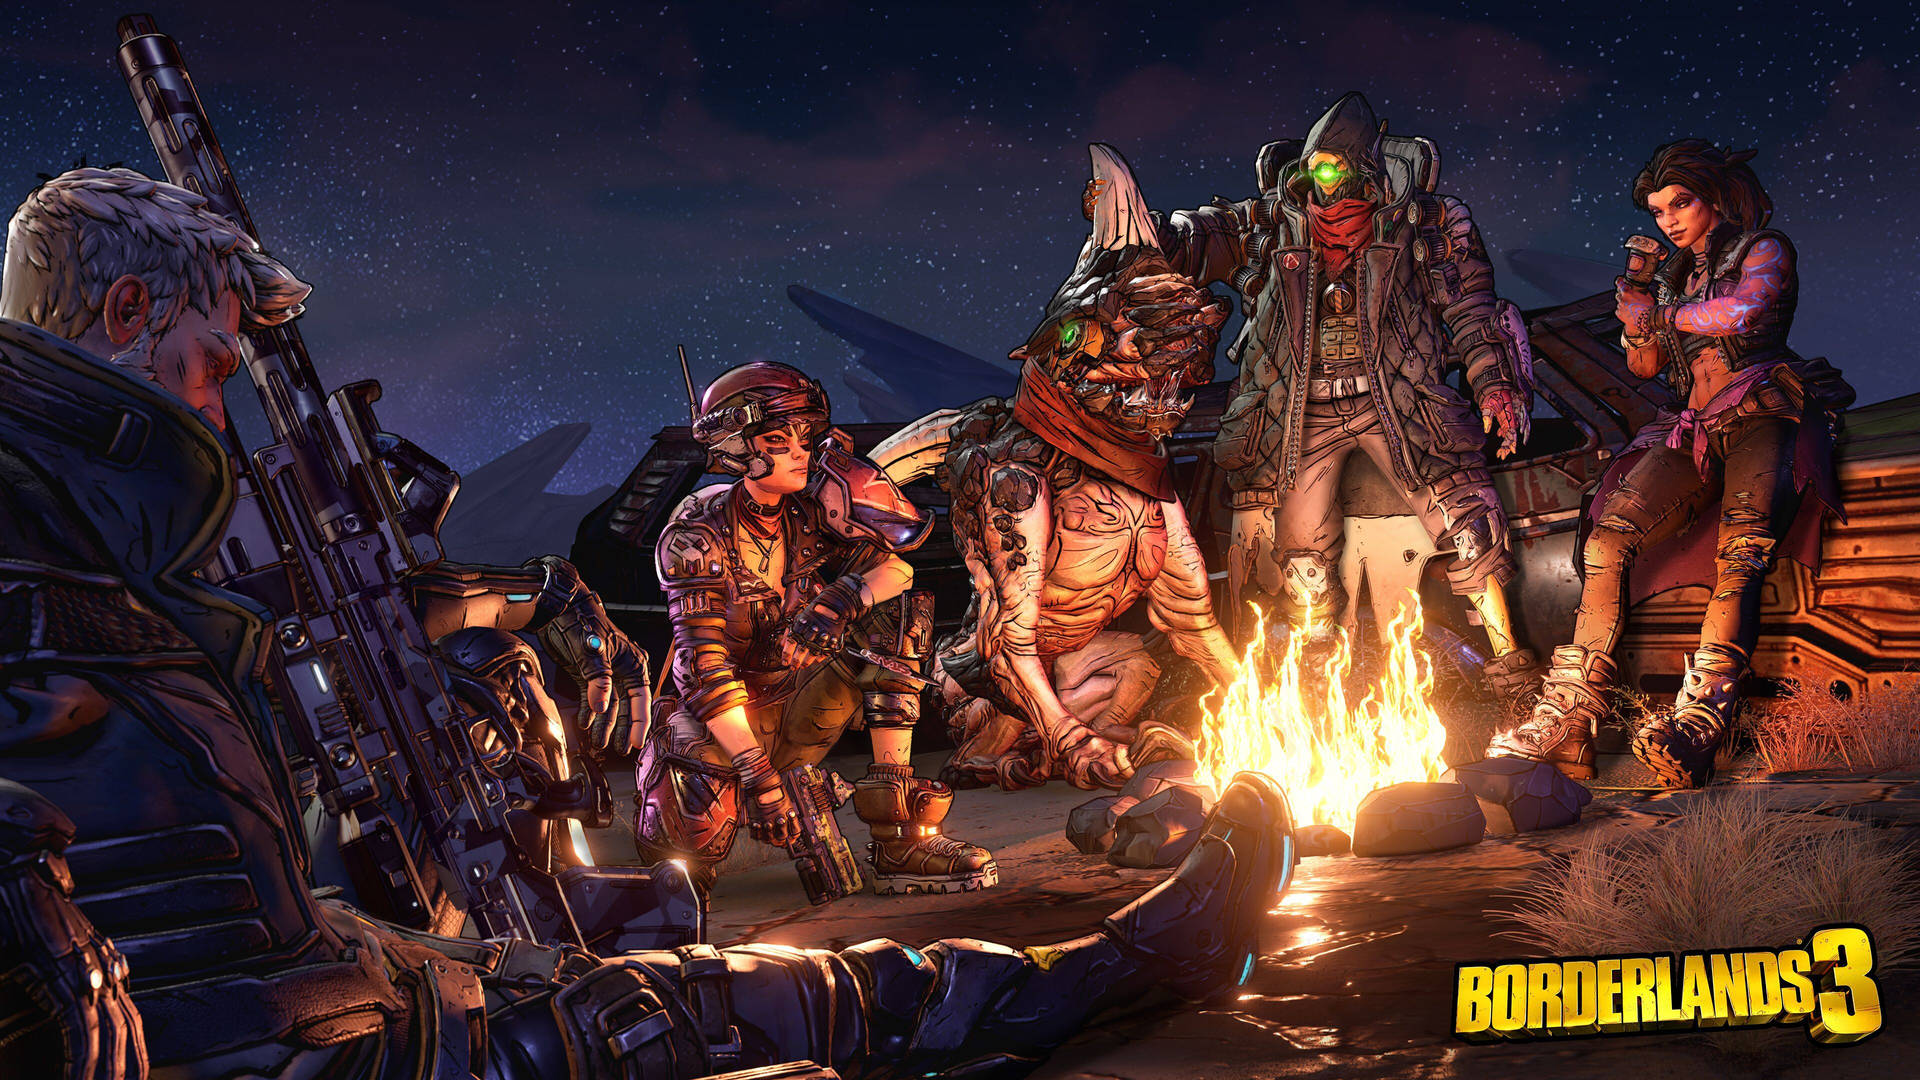 3840X2160 Borderlands 3 Wallpaper and Background